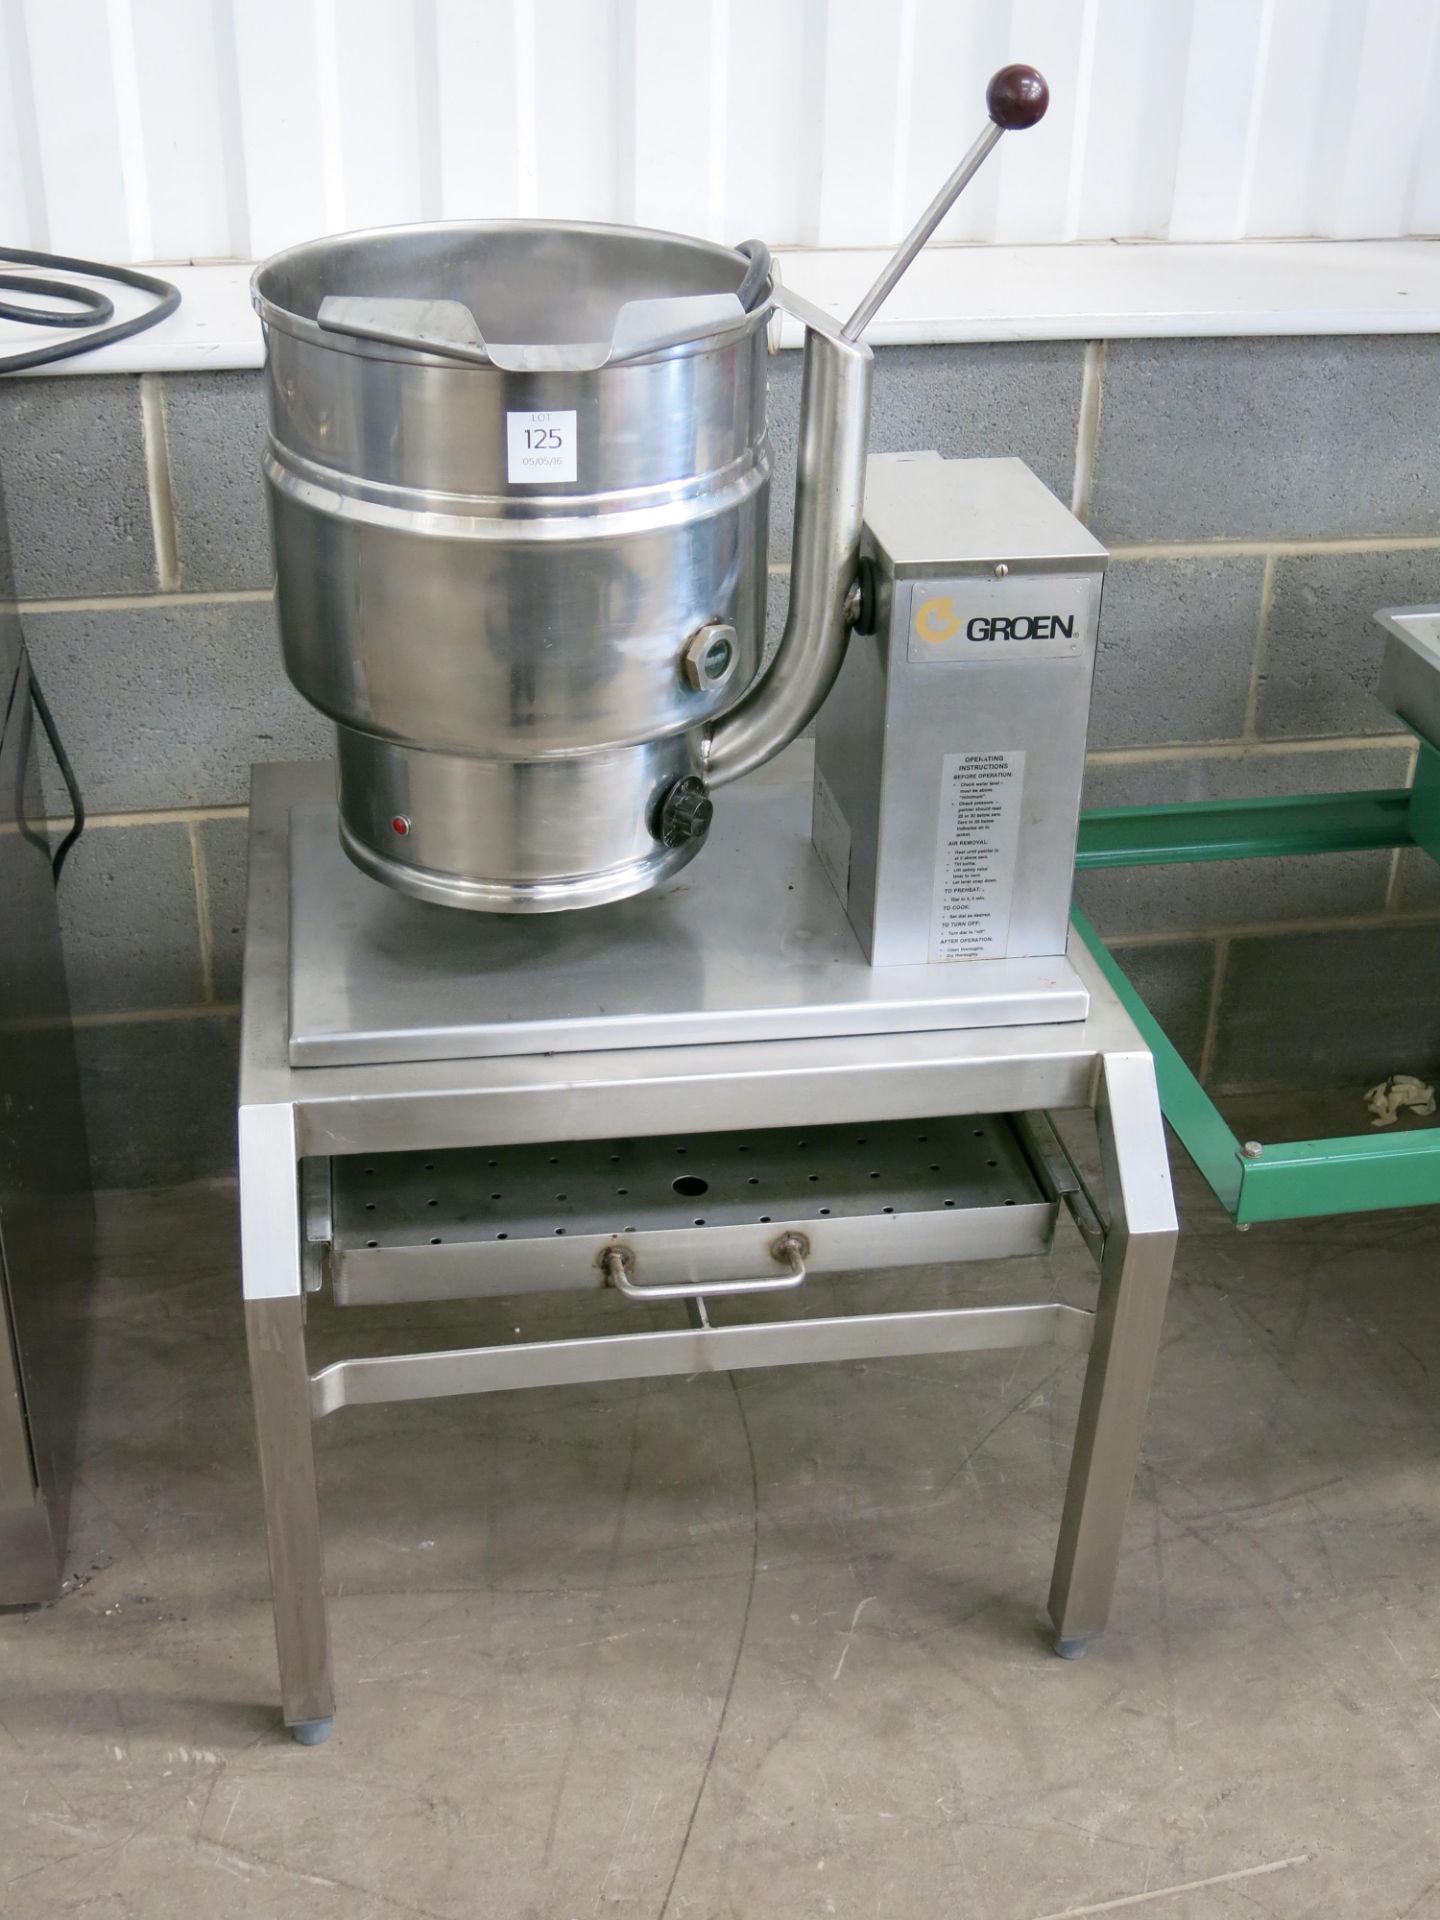 Groen TDB7 steam jacketed kettle, serial number 38761, 3 phase, year of manufacture 1995. Please